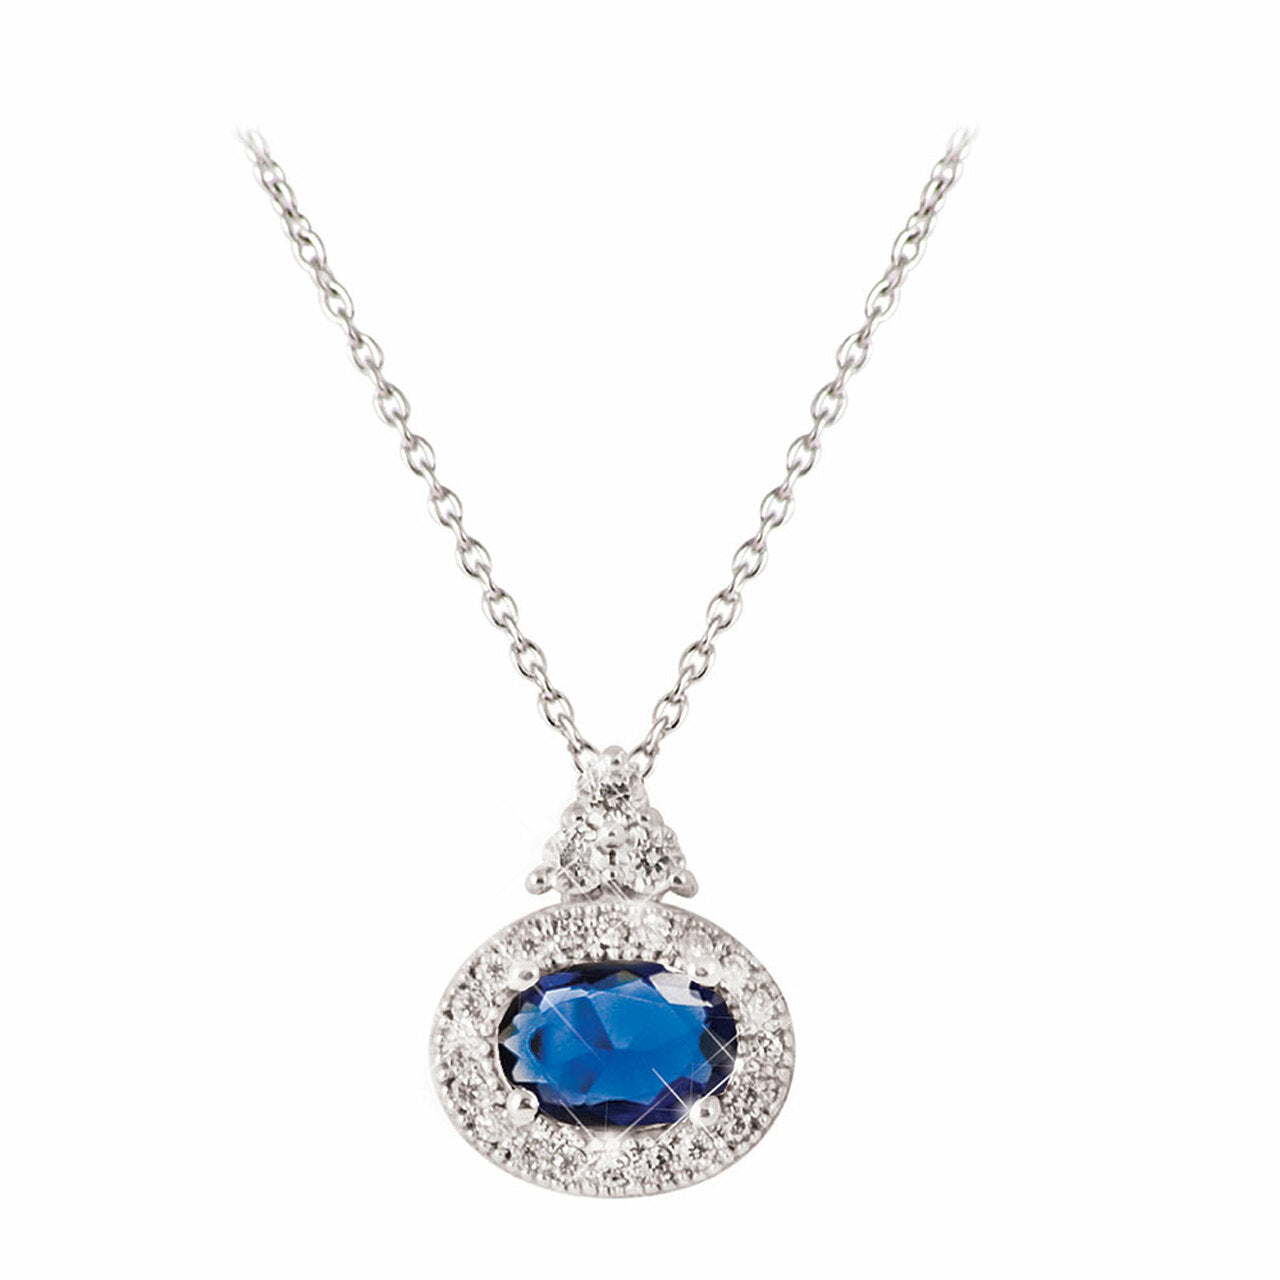 Silver Pendant Oval Sapphire White Surround by Tipperary Crystal  This radiant vintage-inspired pendant will be treasured for years to come. Crafted in silver, this feminine look features a beautiful oval shaped rich blue crystal. Shimmering round clear crystals form a halo around the dazzling center stone